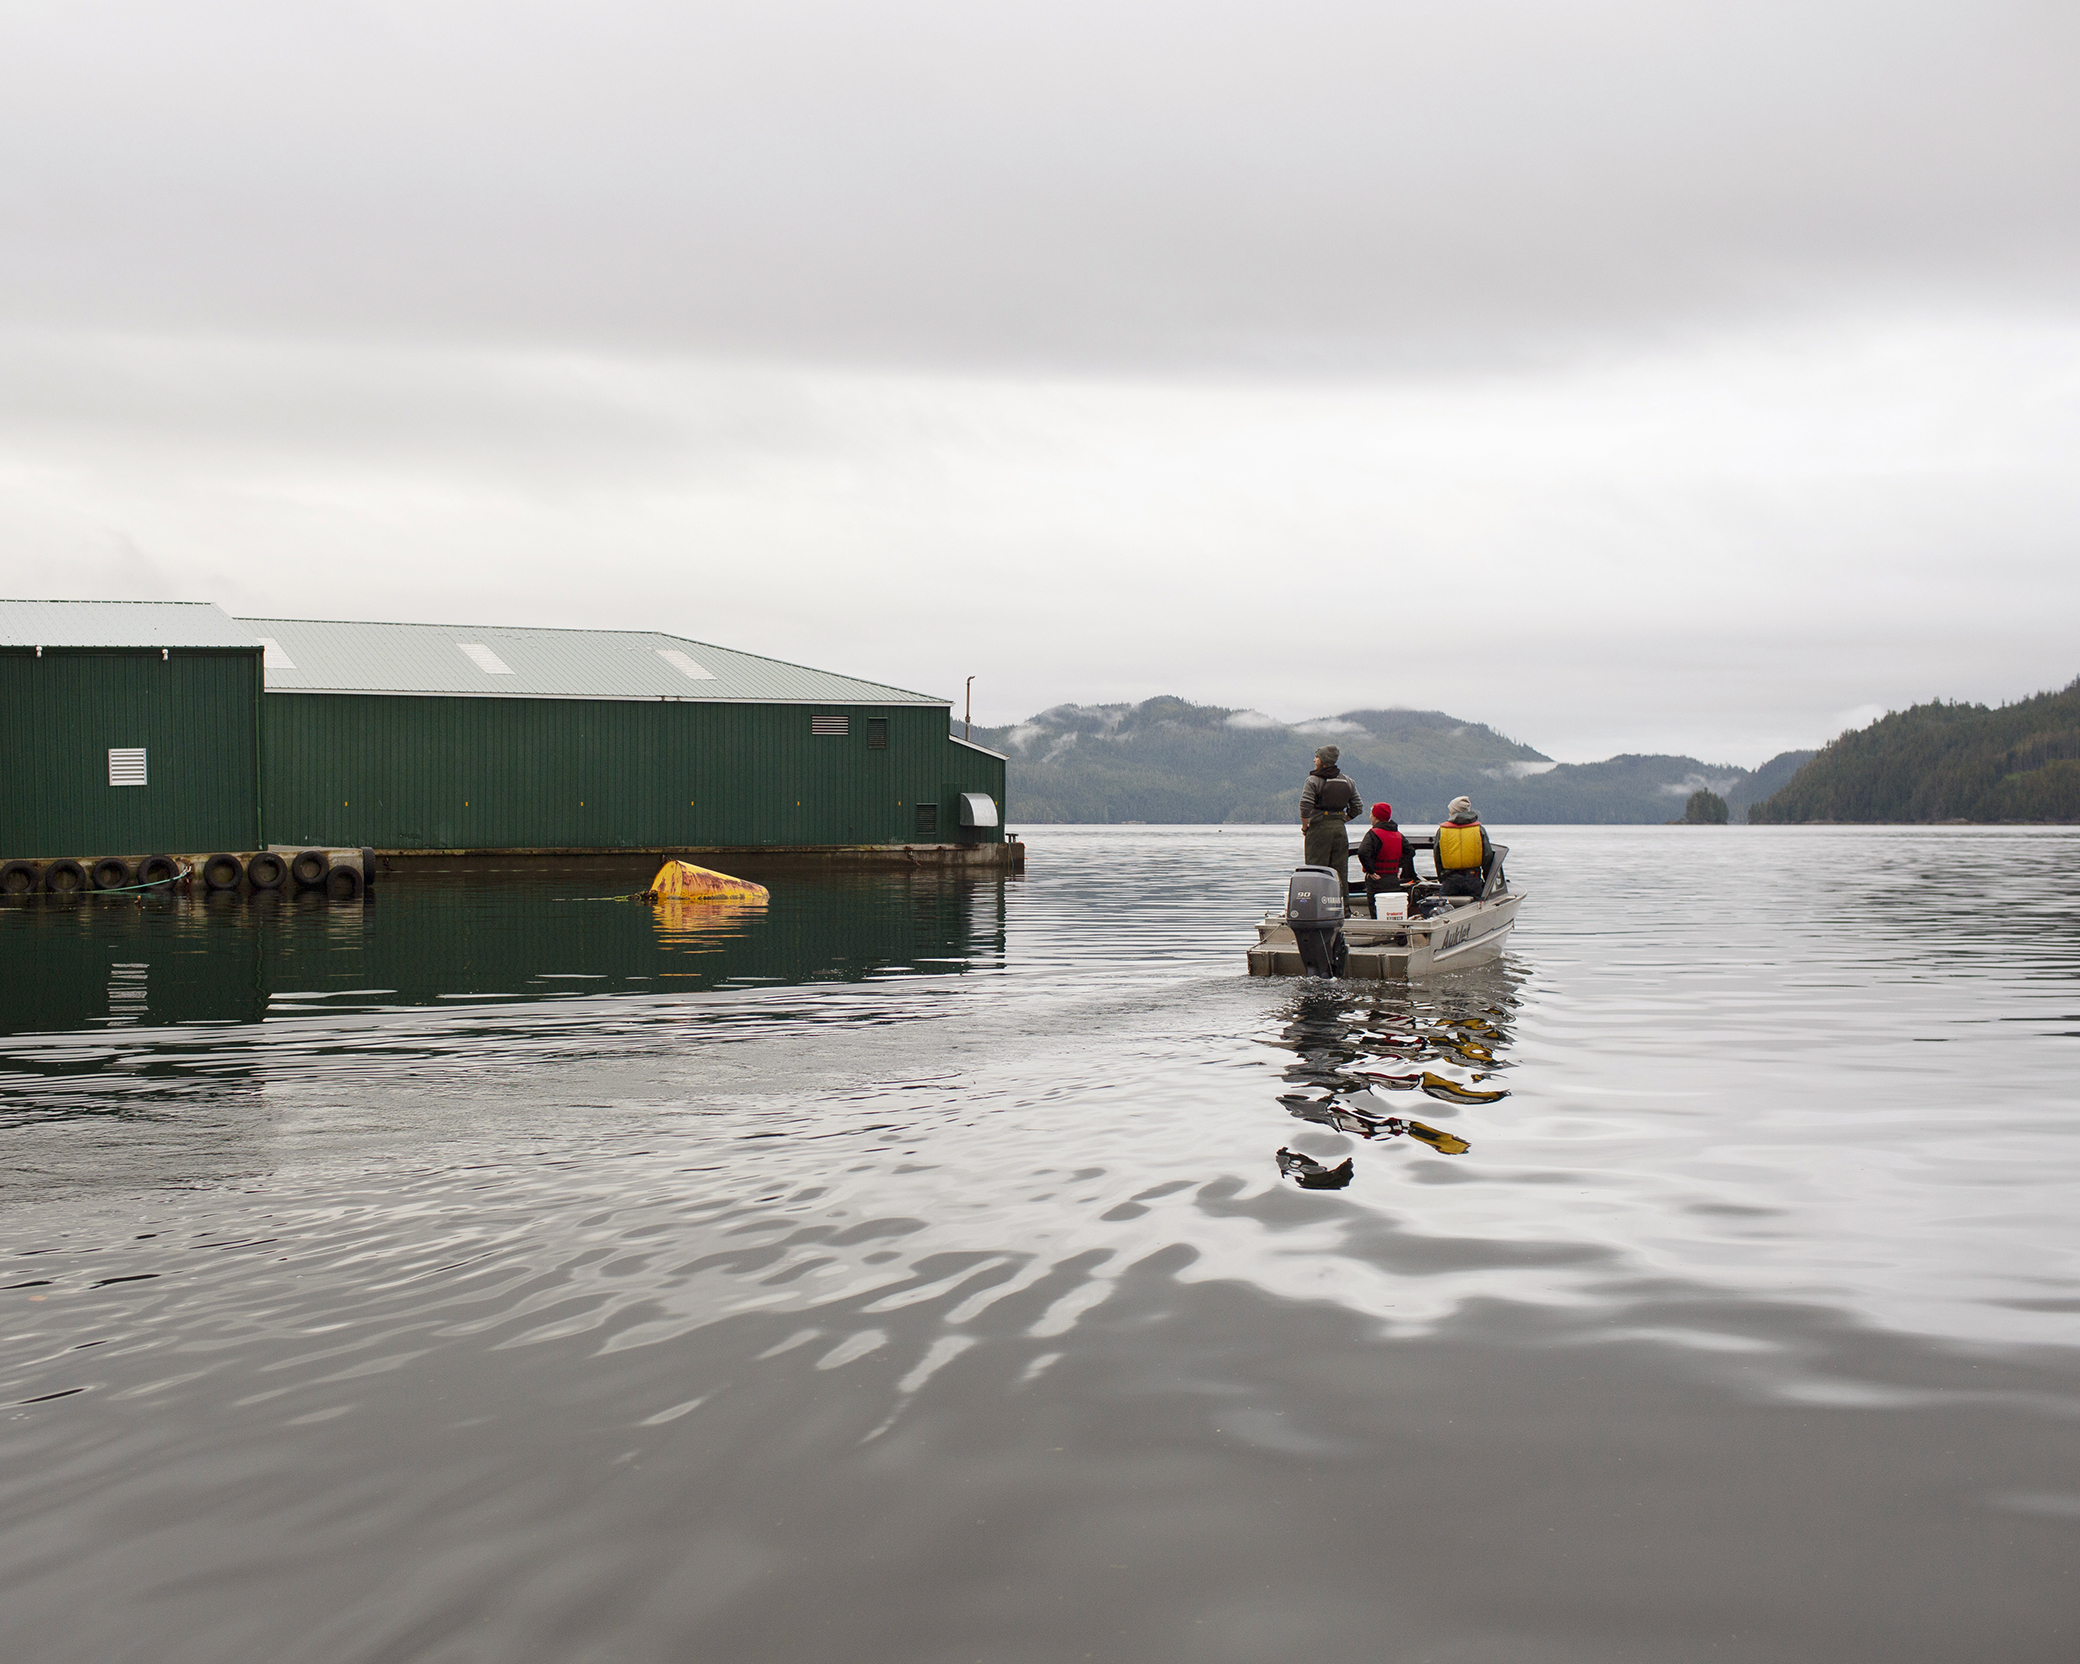 Researchers on a boat approach a green building, a salmon farm